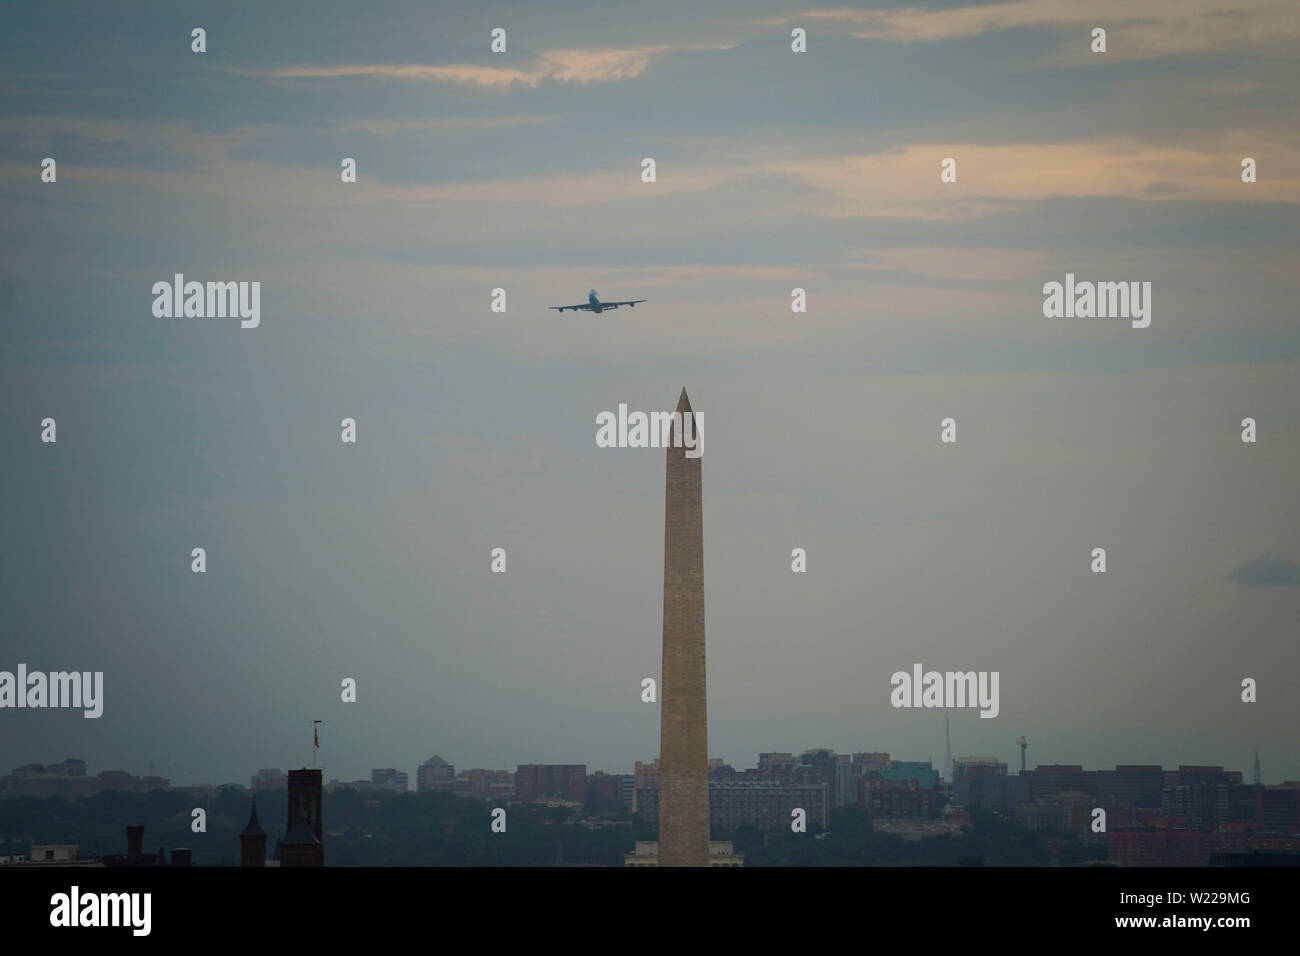 Washington, DC, USA. 4th July, 2019. A Boeing VC-25, known as Air Force One when the president is aboard, flies over the National Mall and Washington Monument. The military flyovers were arranged at the behest of President Trump, part of his controversial "Salute to America"" address on Independence Day from the Lincoln Memorial at one end of the National Mall in Washington, DC. Credit: Jay Mallin/ZUMA Wire/Alamy Live News Stock Photo